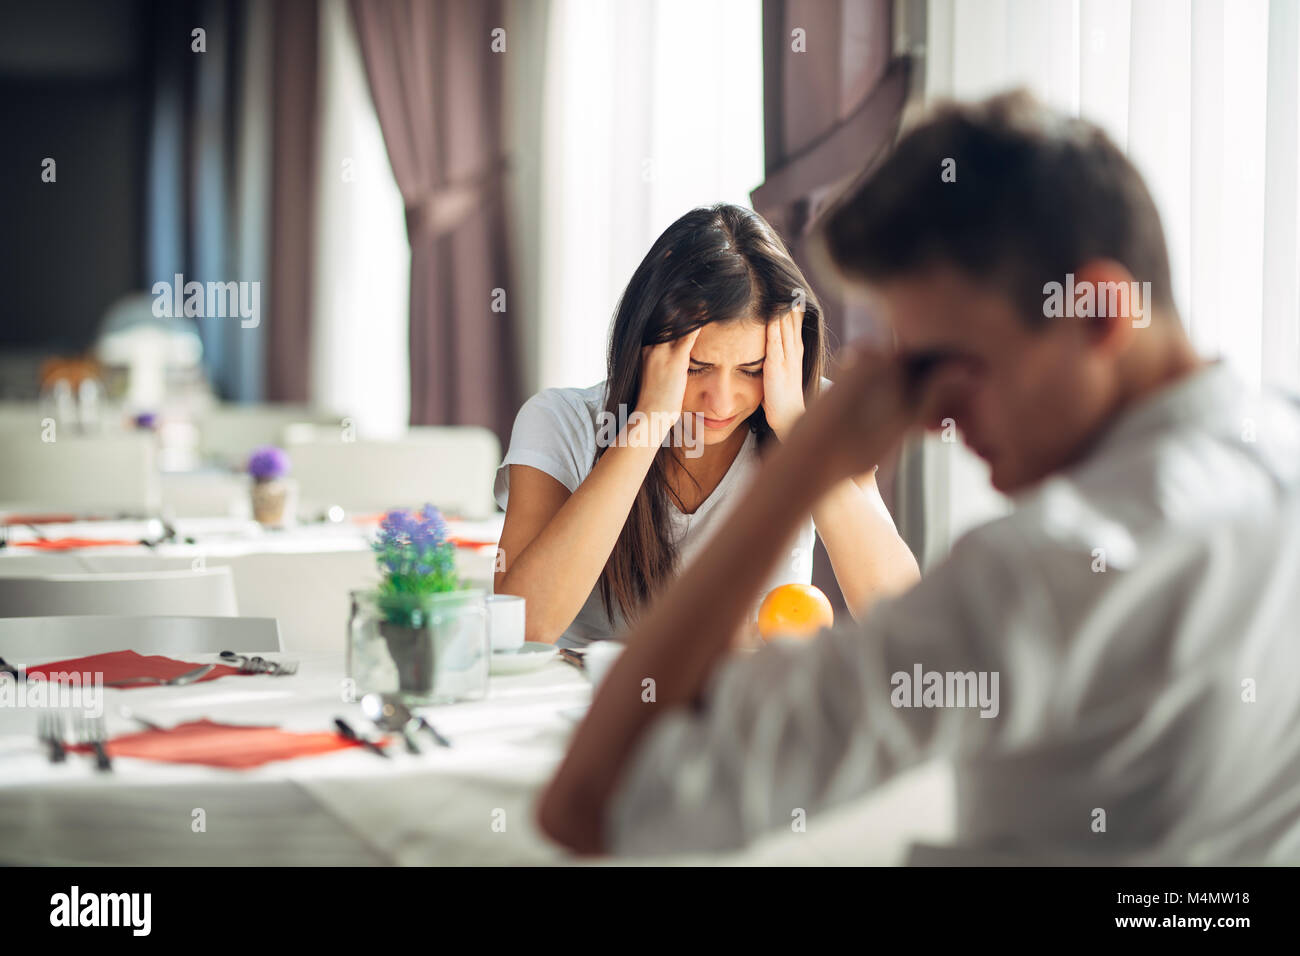 Desperate woman crying.Emotional problems.Relationship issues.Breaking up,divorce,having hurtful conversation.Confession,telling truth.Financial probl Stock Photo